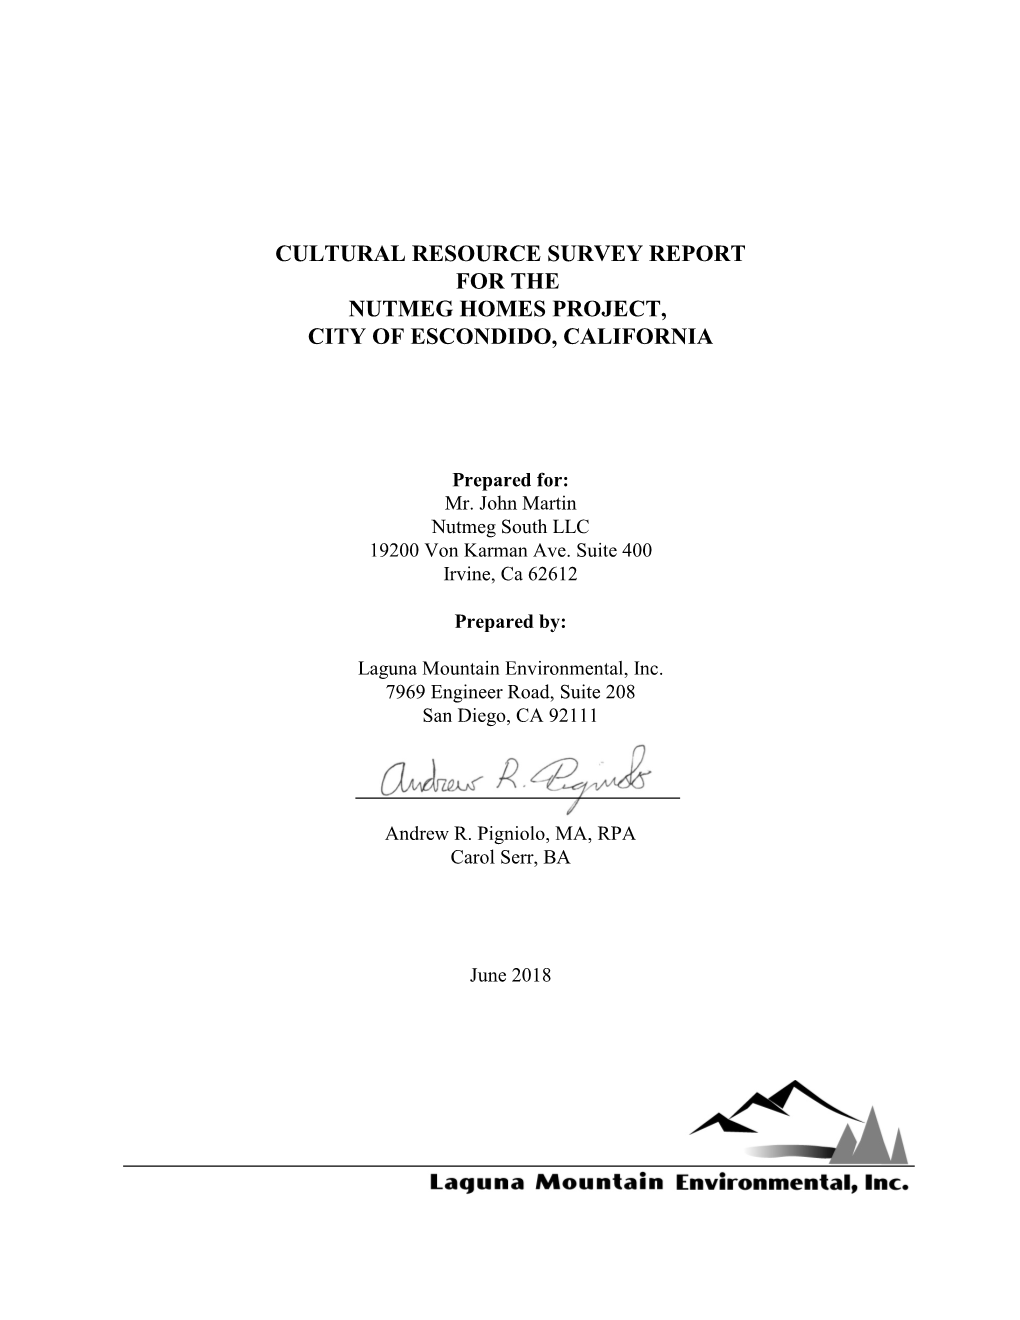 Cultural Resource Survey Report for the Nutmeg Homes Project, City of Escondido, California